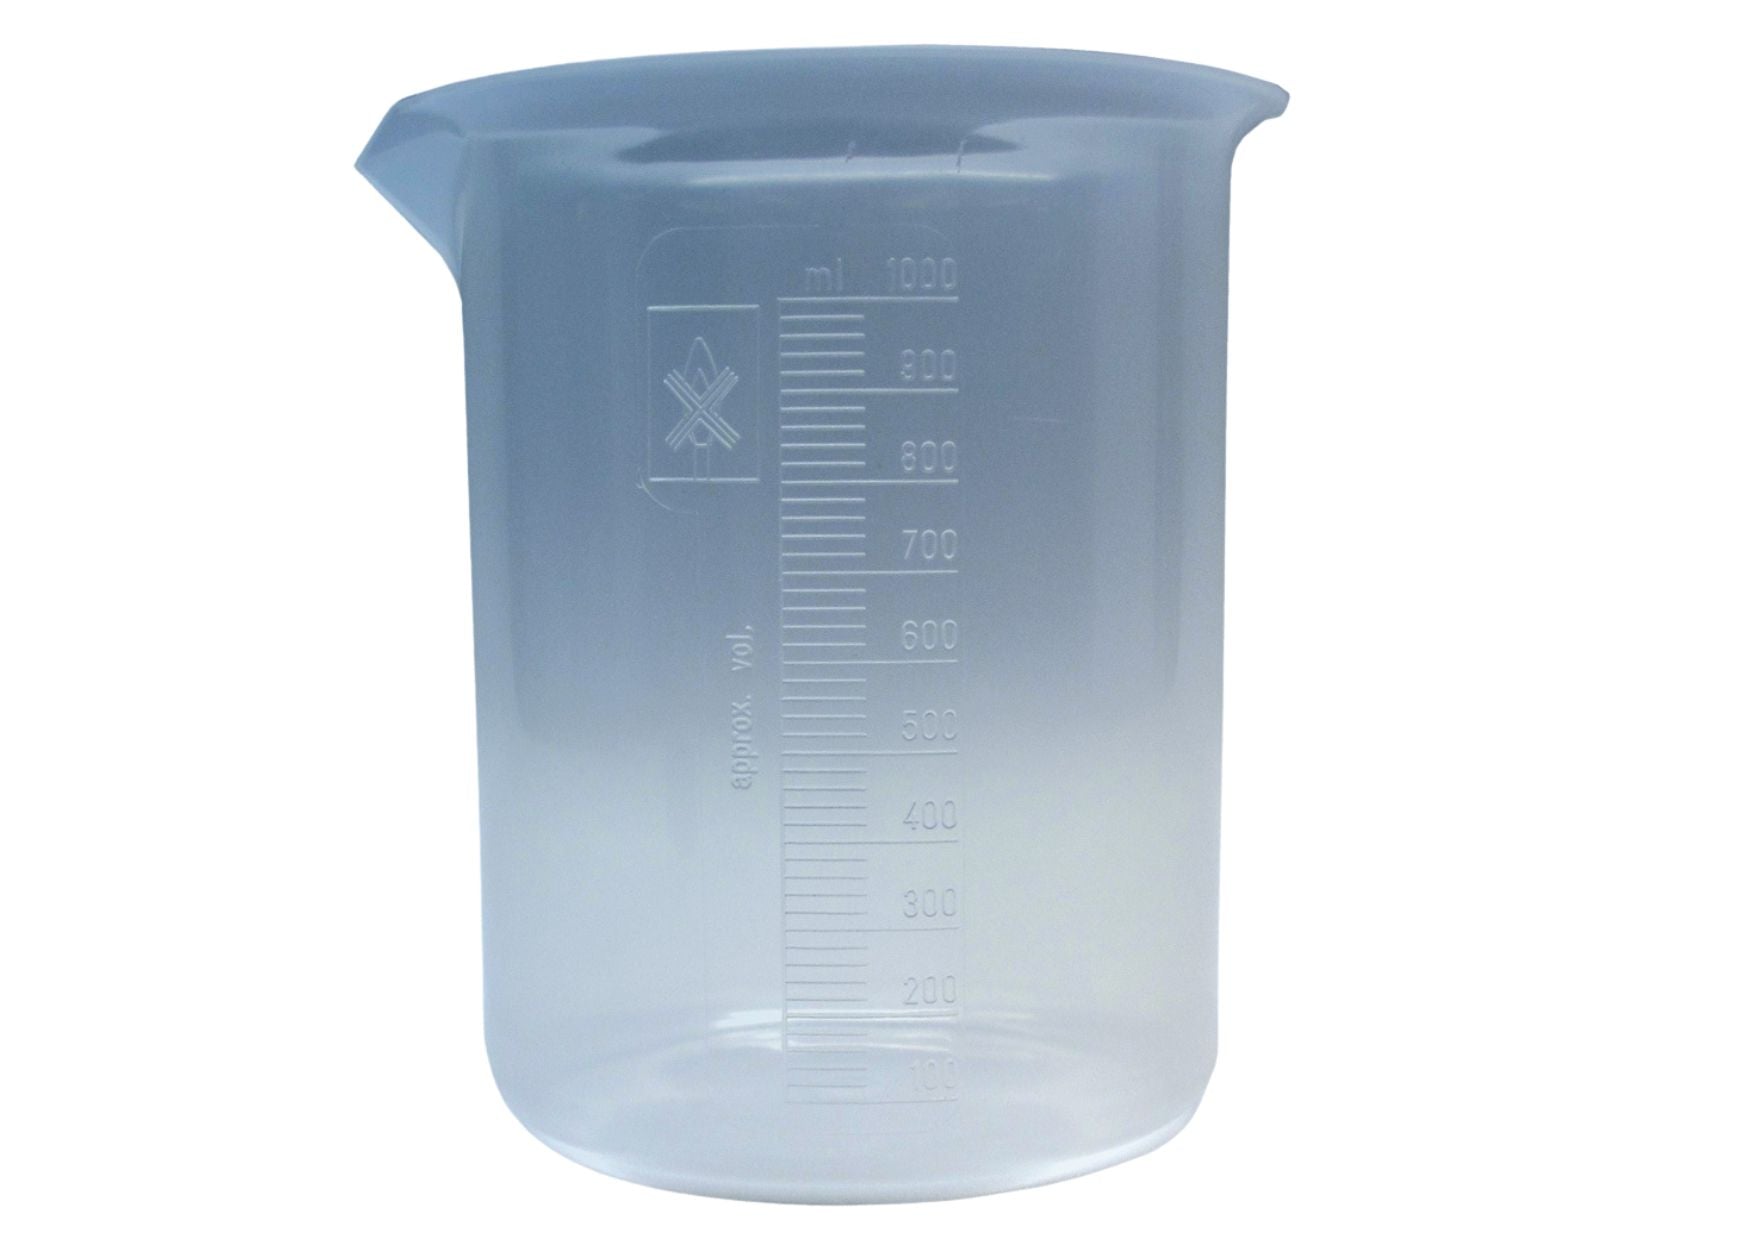 Graduated measuring cup 1000 ml